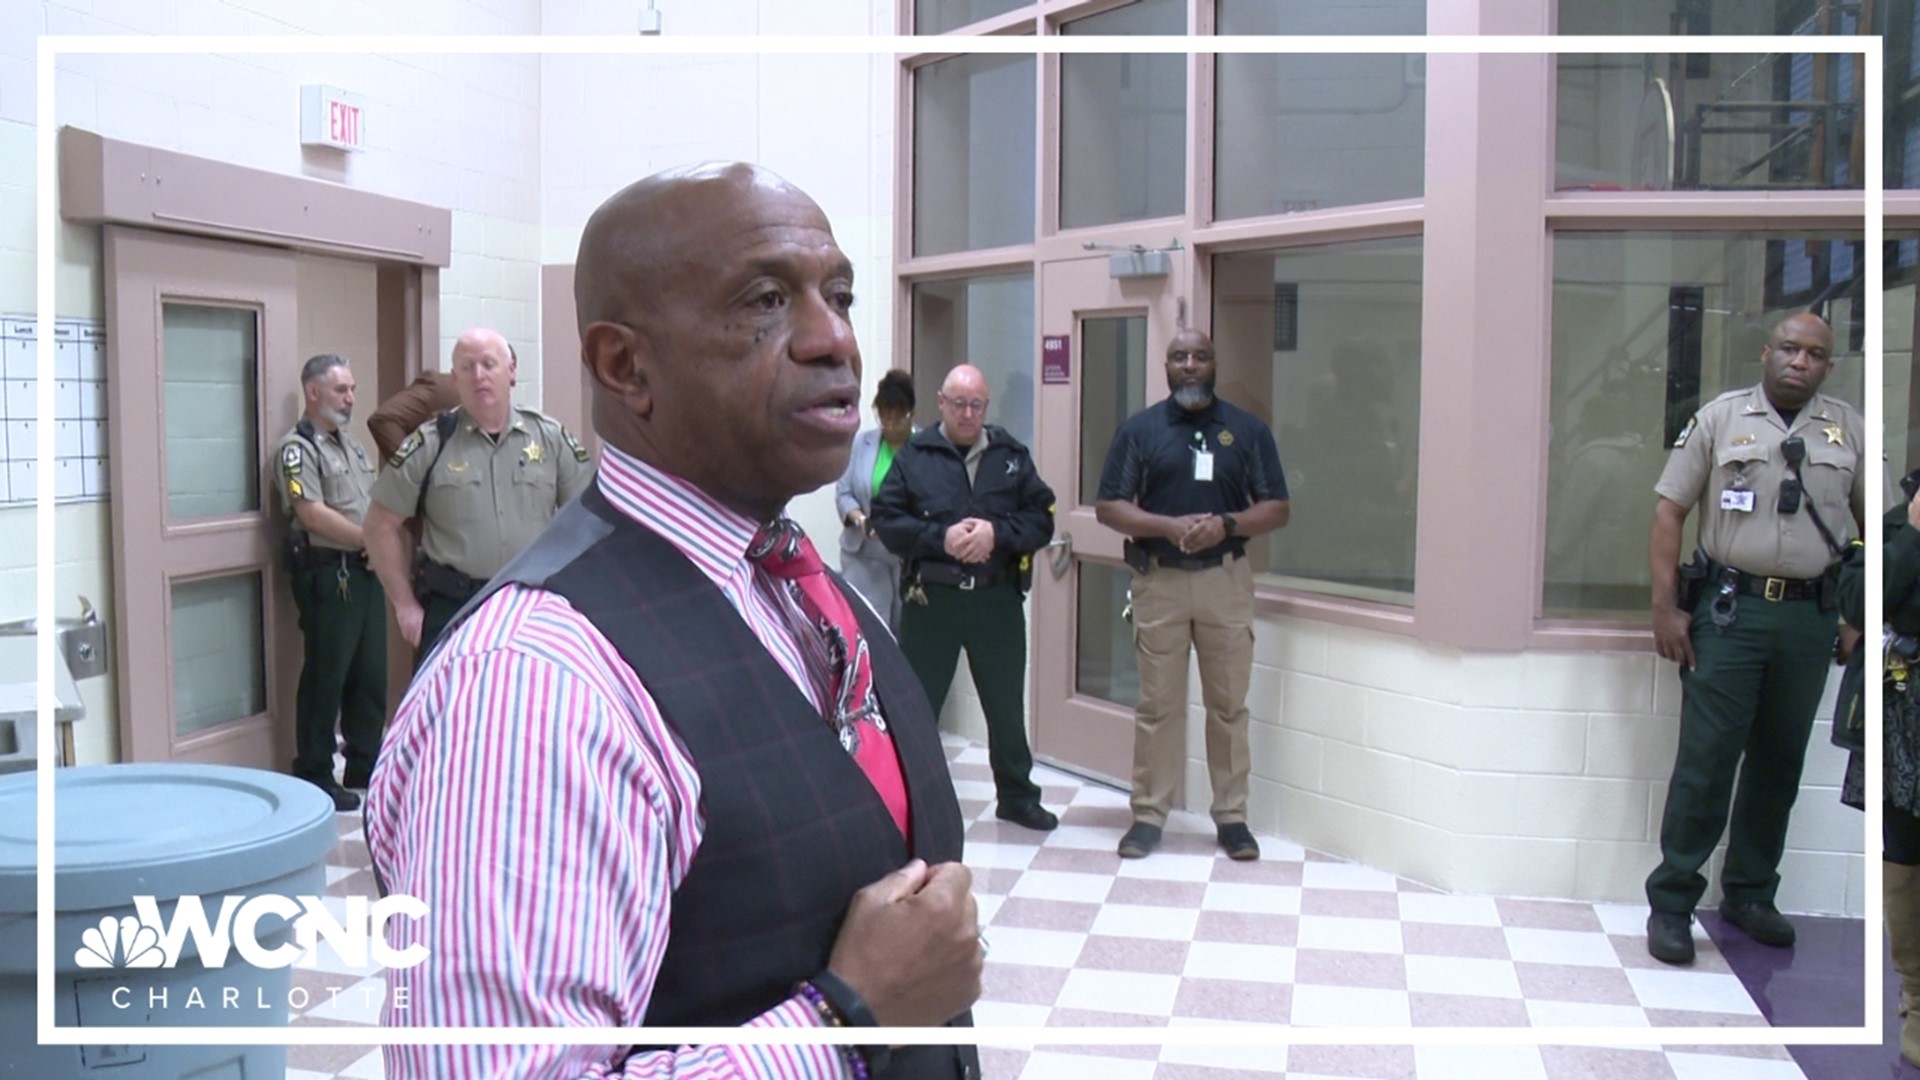 Garry McFadden is threatening to open an investigation into the state health department and jail inspectors.